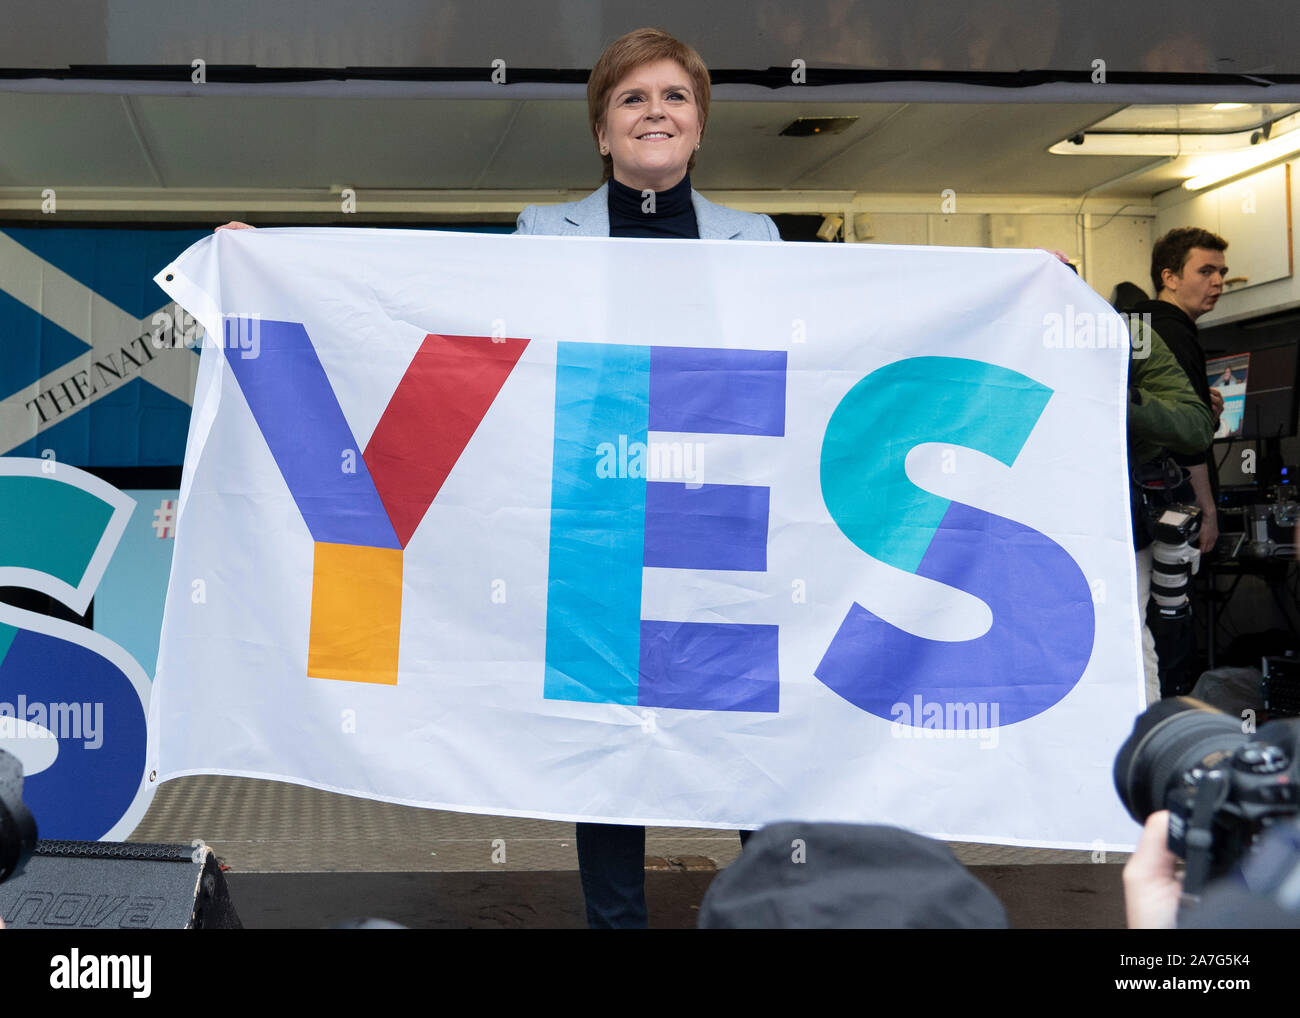 Scotland, UK. 2nd November 2019. Supporters of Scottish nationalism attend a rally in George Square Glasgow. The rally was organised by The National newspaper, the Scottish pro-Nationalism newspaper. First Minister Nicola Sturgeon addressed the rally.  Iain Masterton/Alamy Live News. Stock Photo